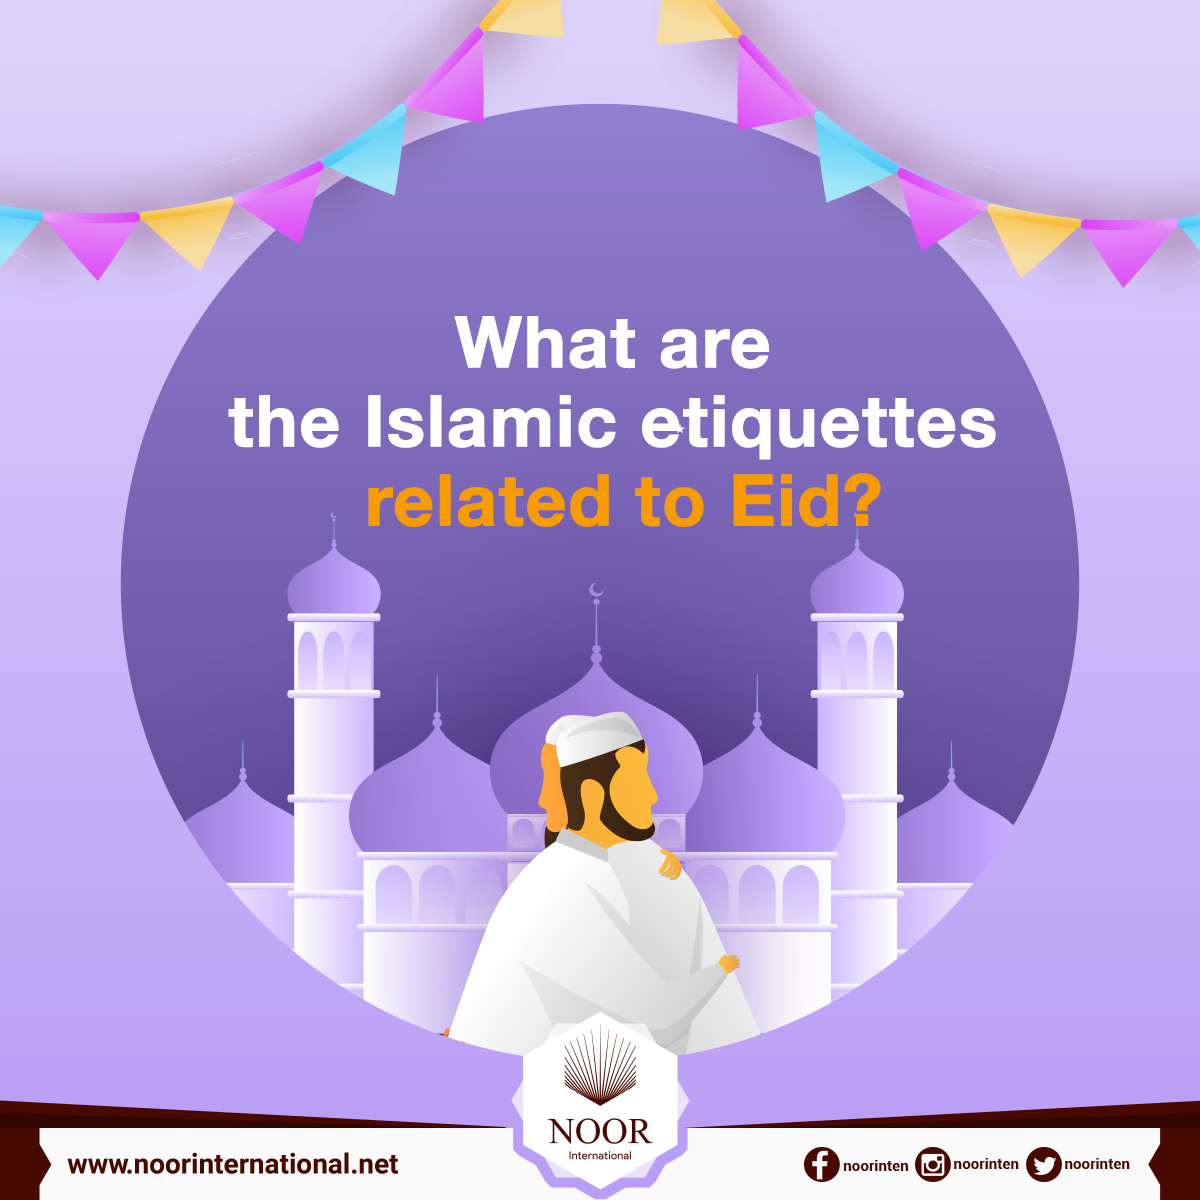 What are the Islamic etiquettes related to Eid?